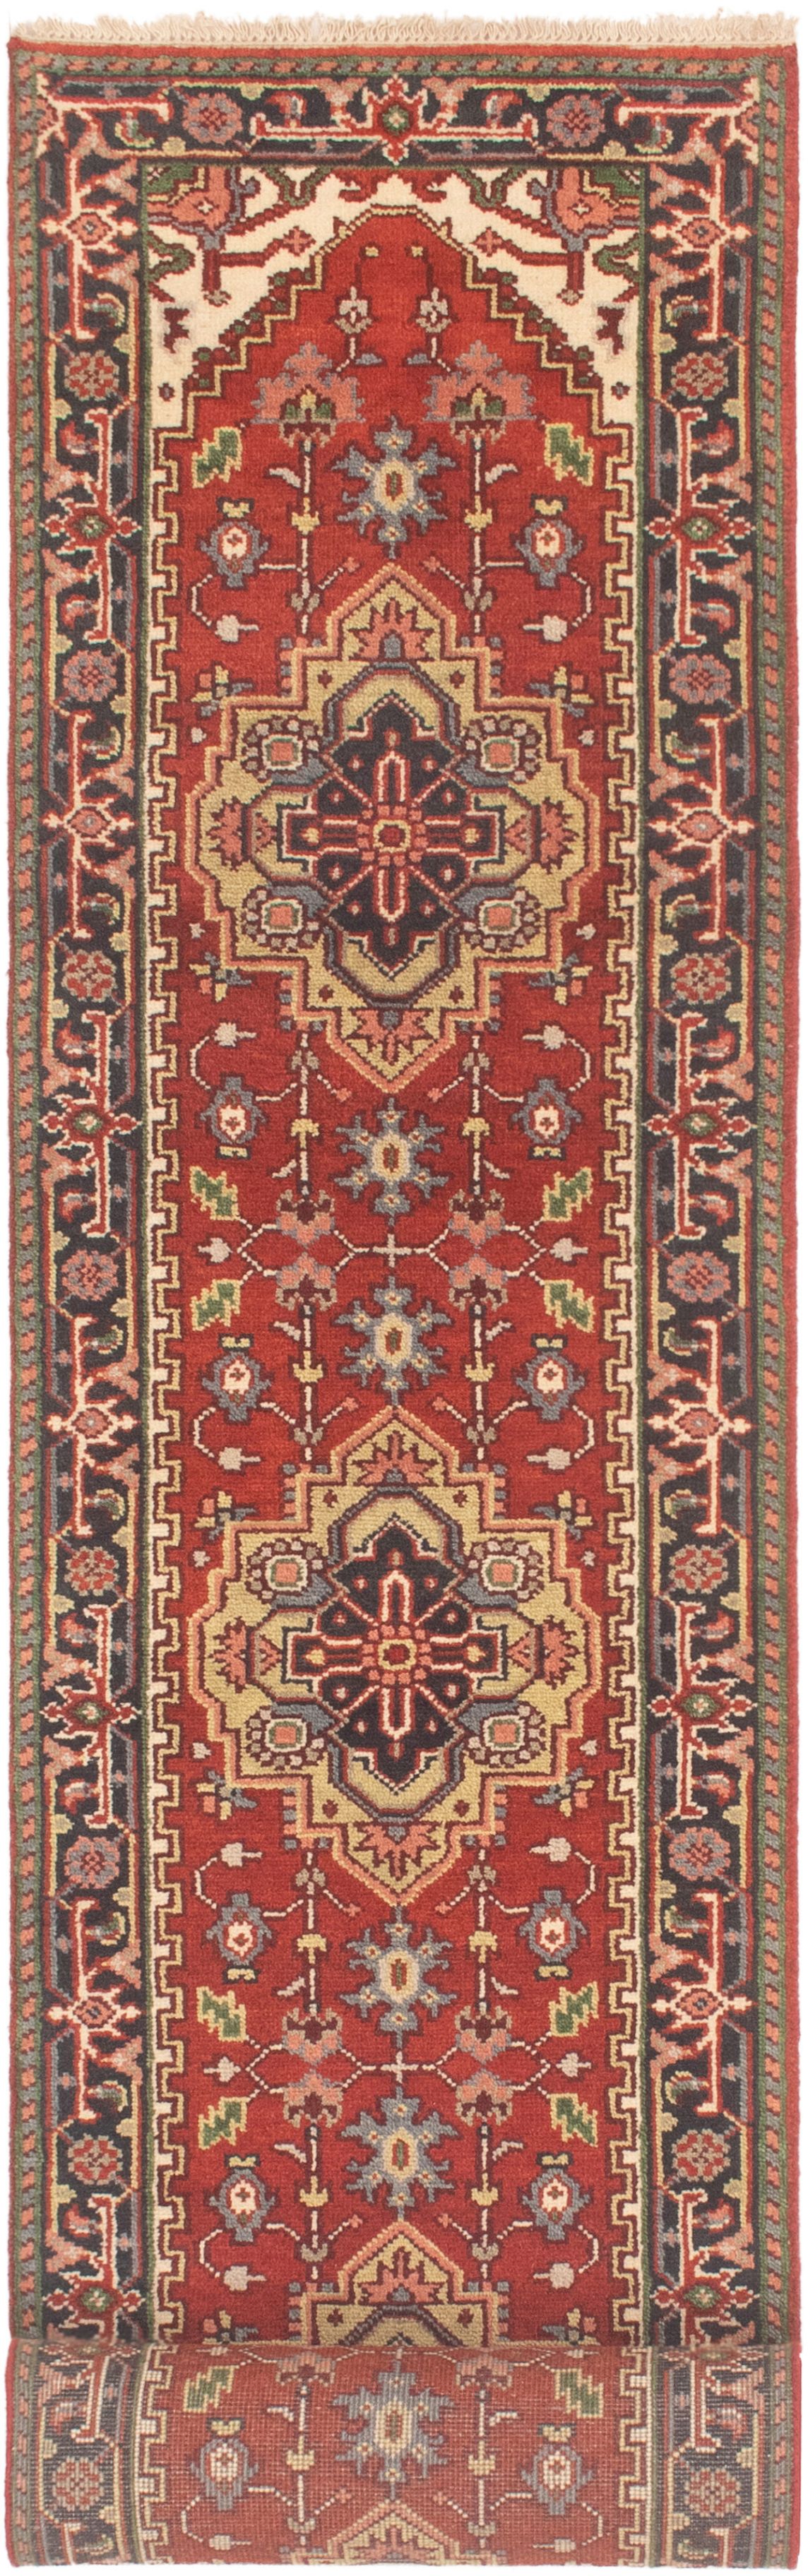 Hand-knotted Serapi Heritage Red Wool Rug 2'6" x 19'6"  Size: 2'6" x 19'6"  